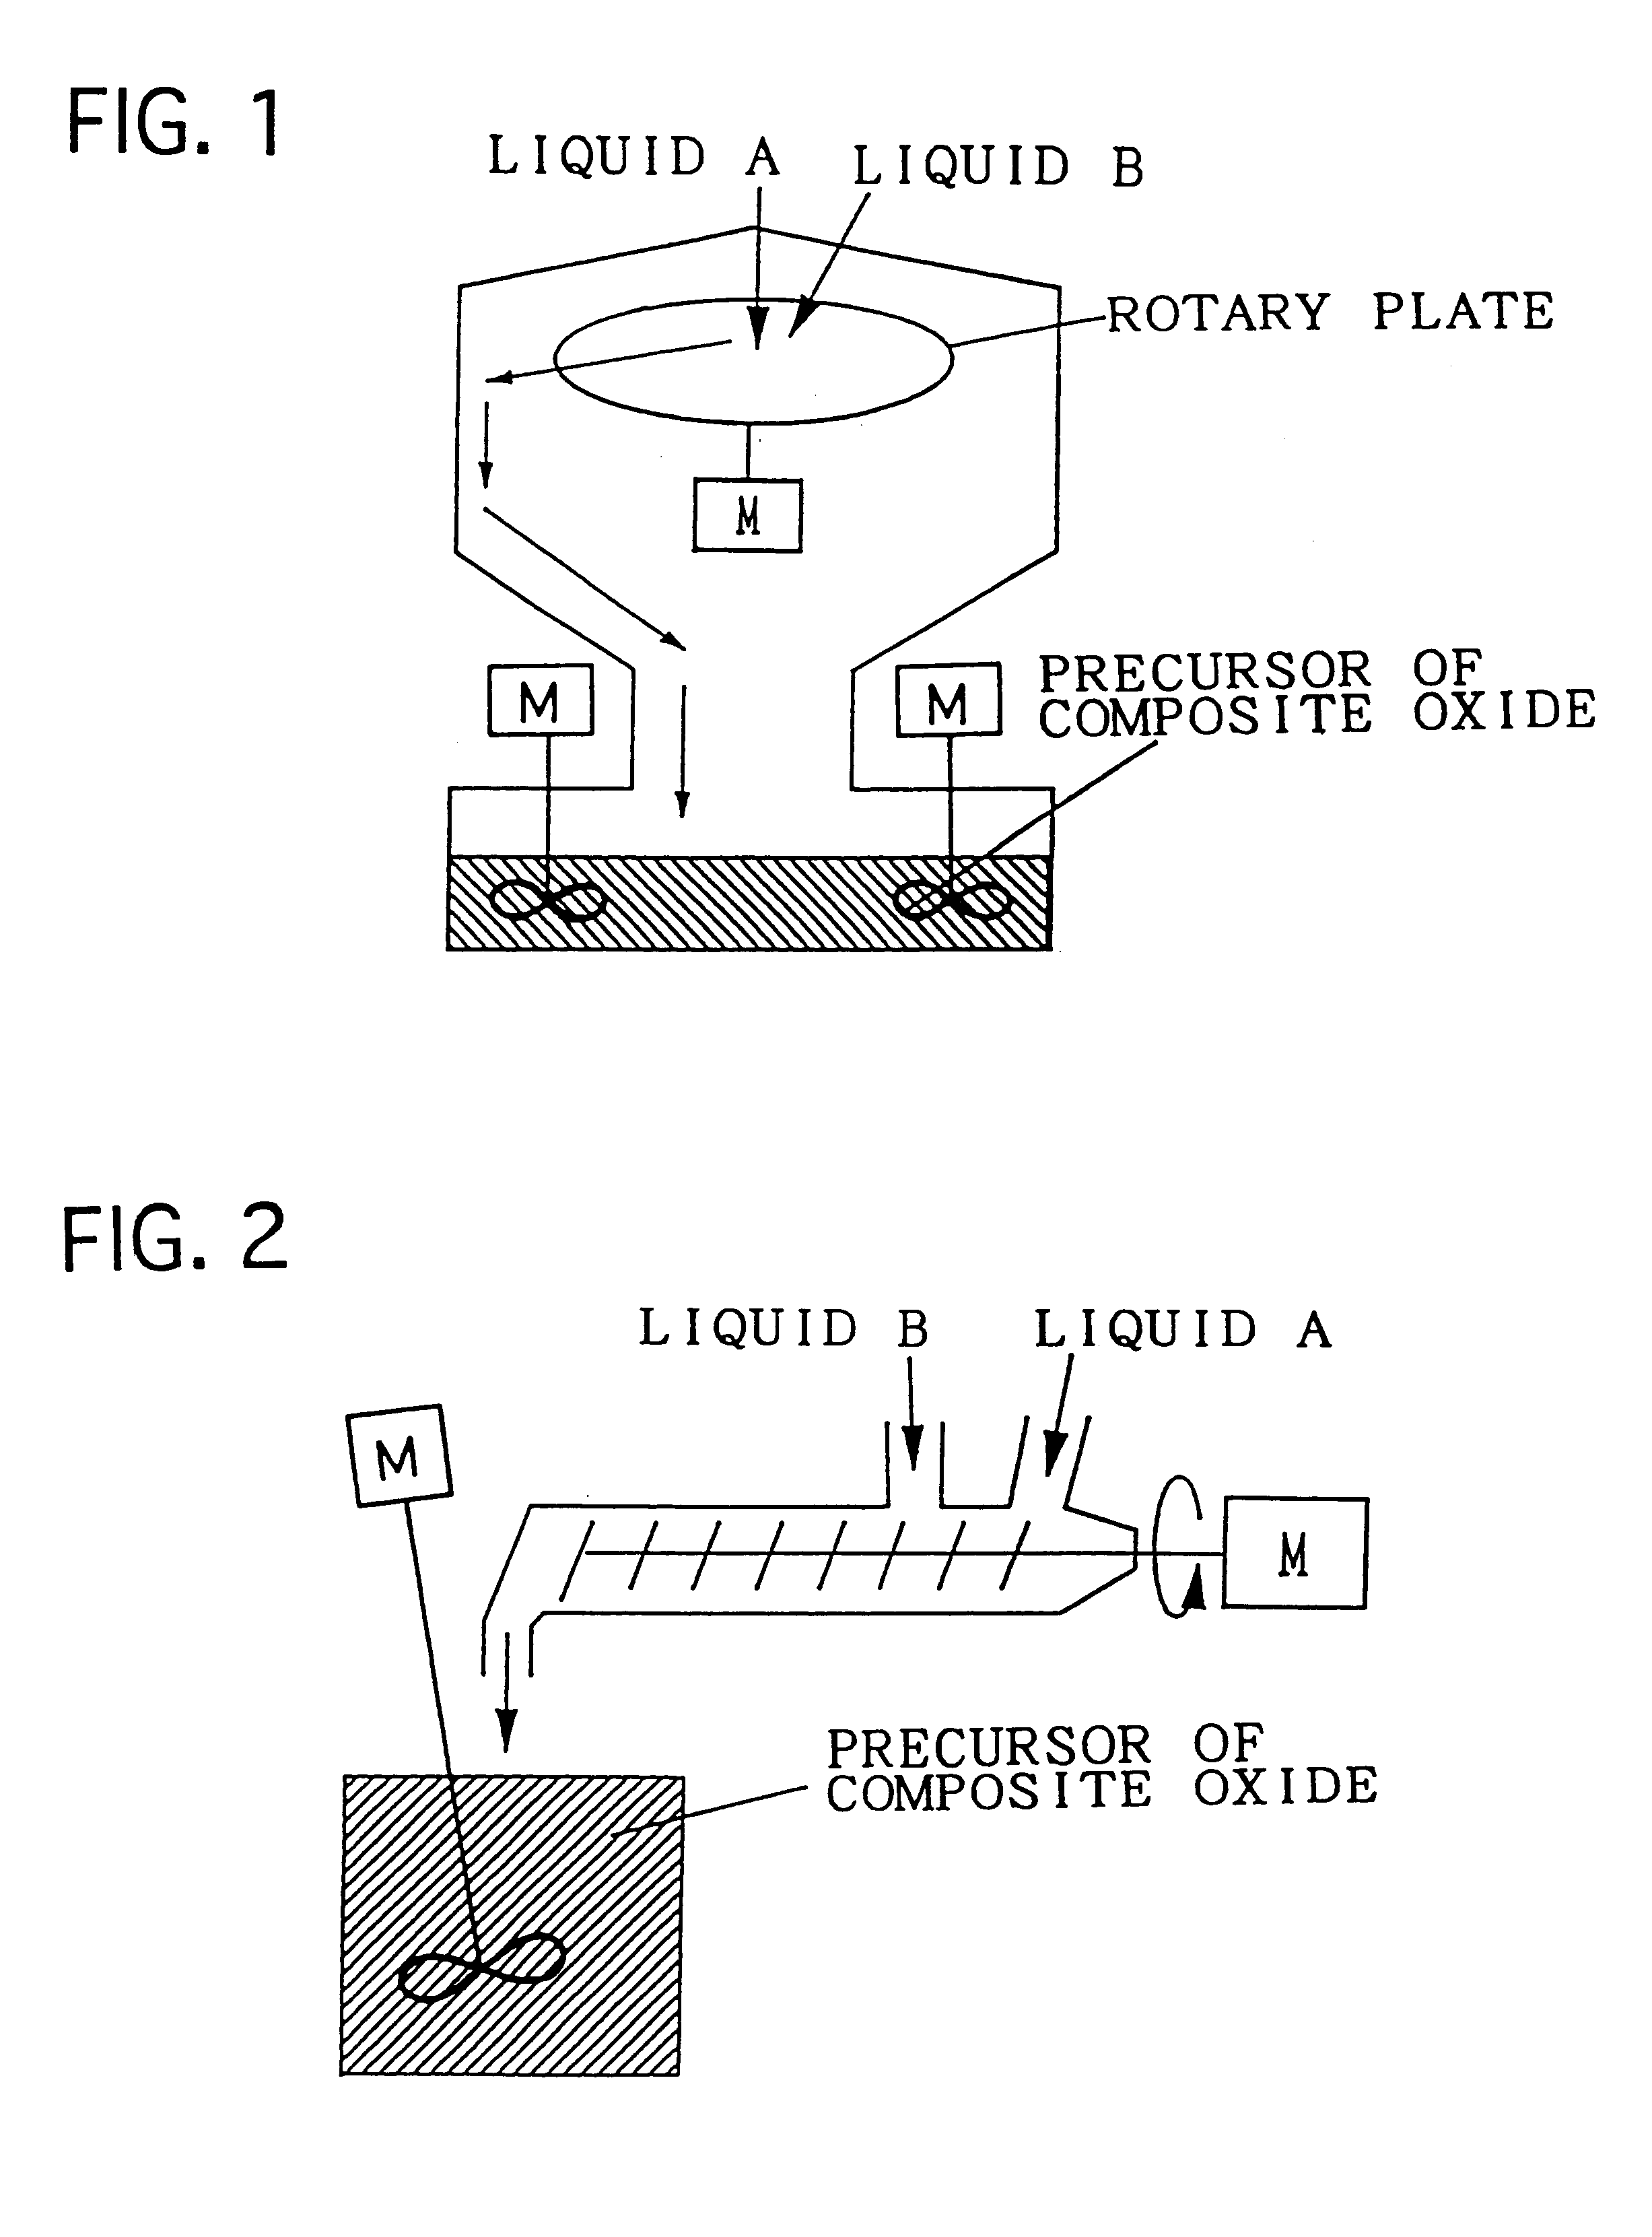 Composite oxide, composite oxide carrier and catalyst